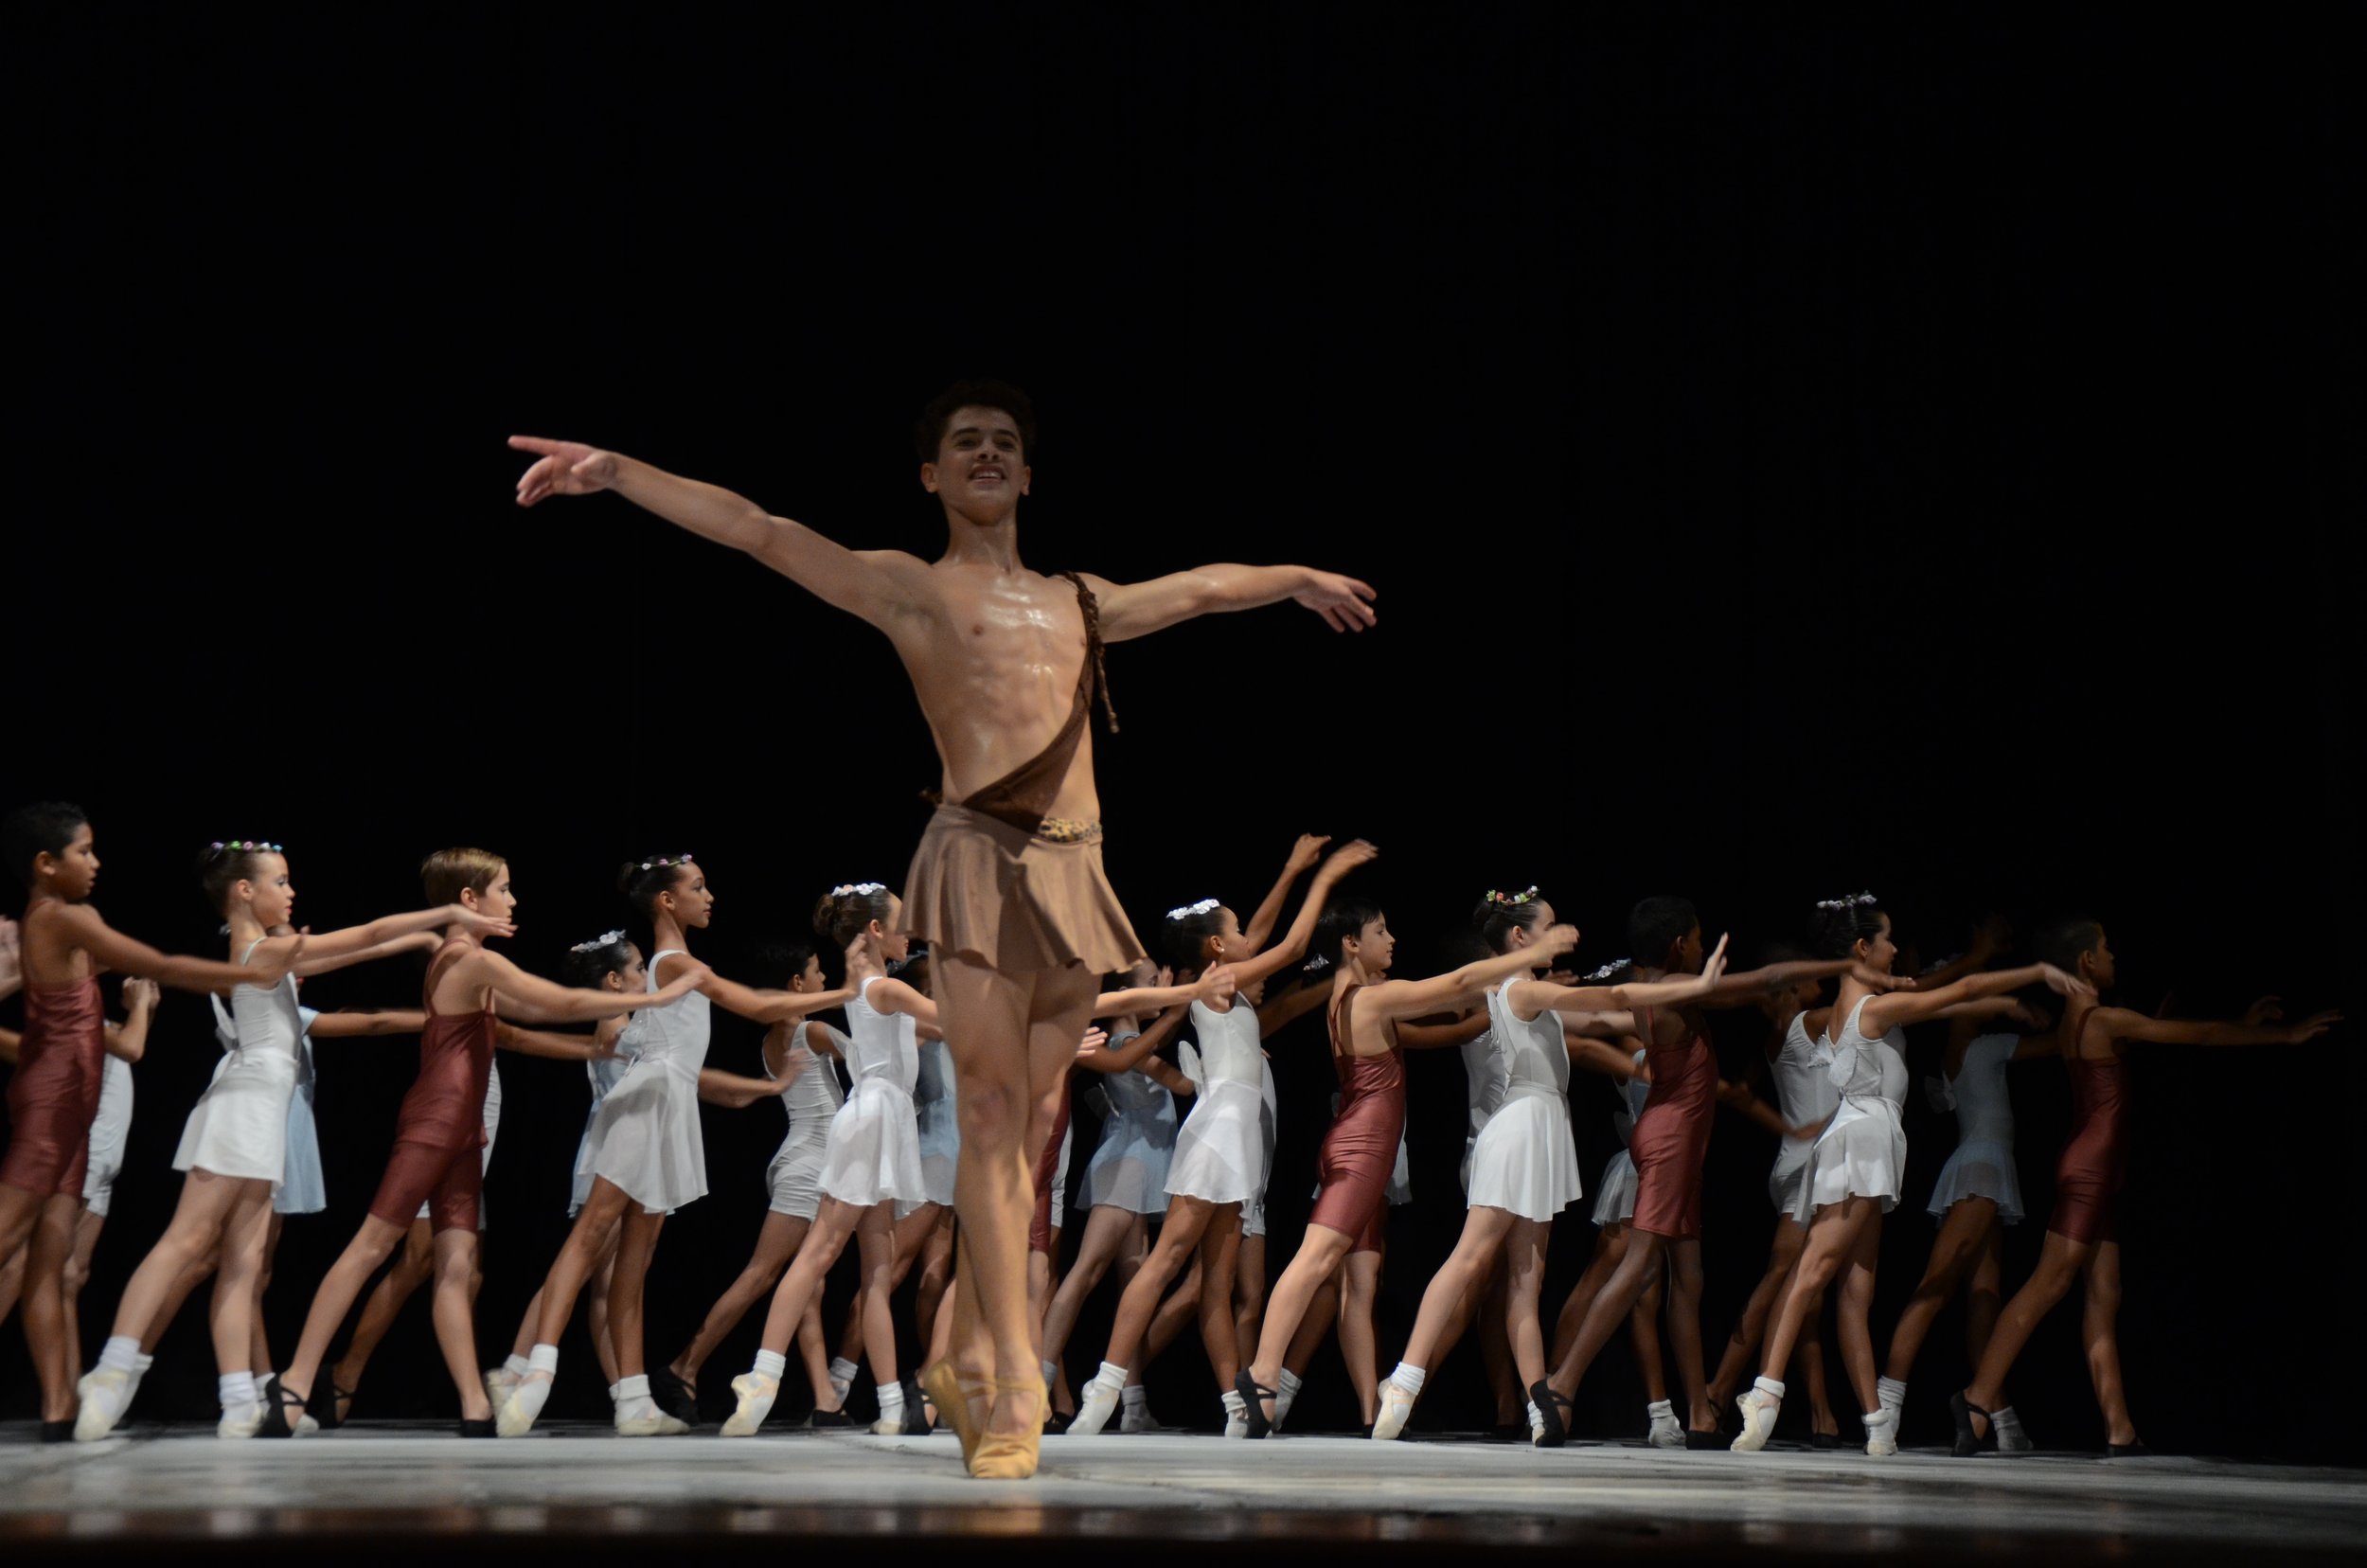 Alexis and his fellow students of the National Ballet School of Cuba 12 © Indyca.JPG